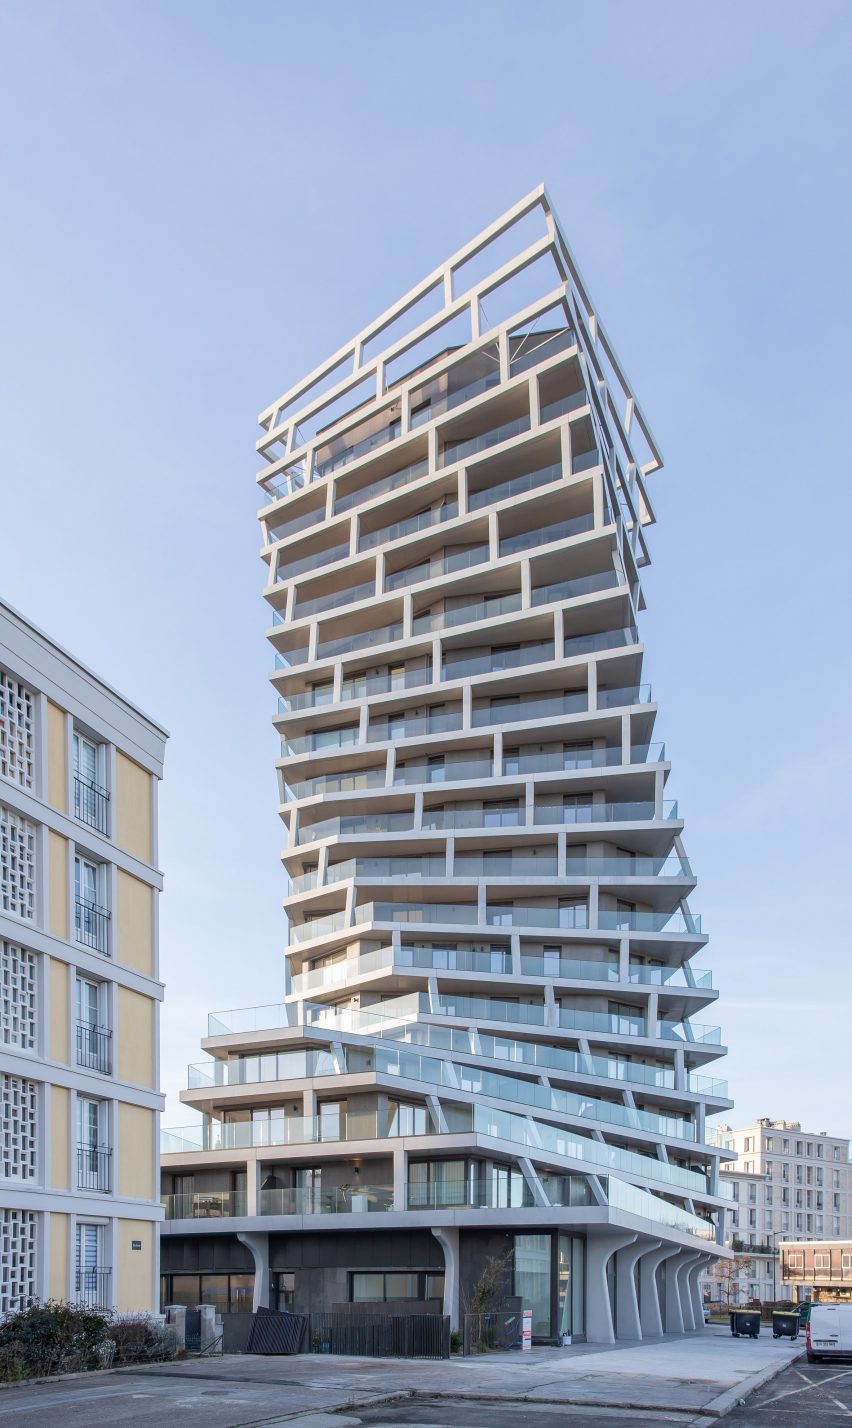 Facade of twisting residential building by Hamonic + Masson & Associés